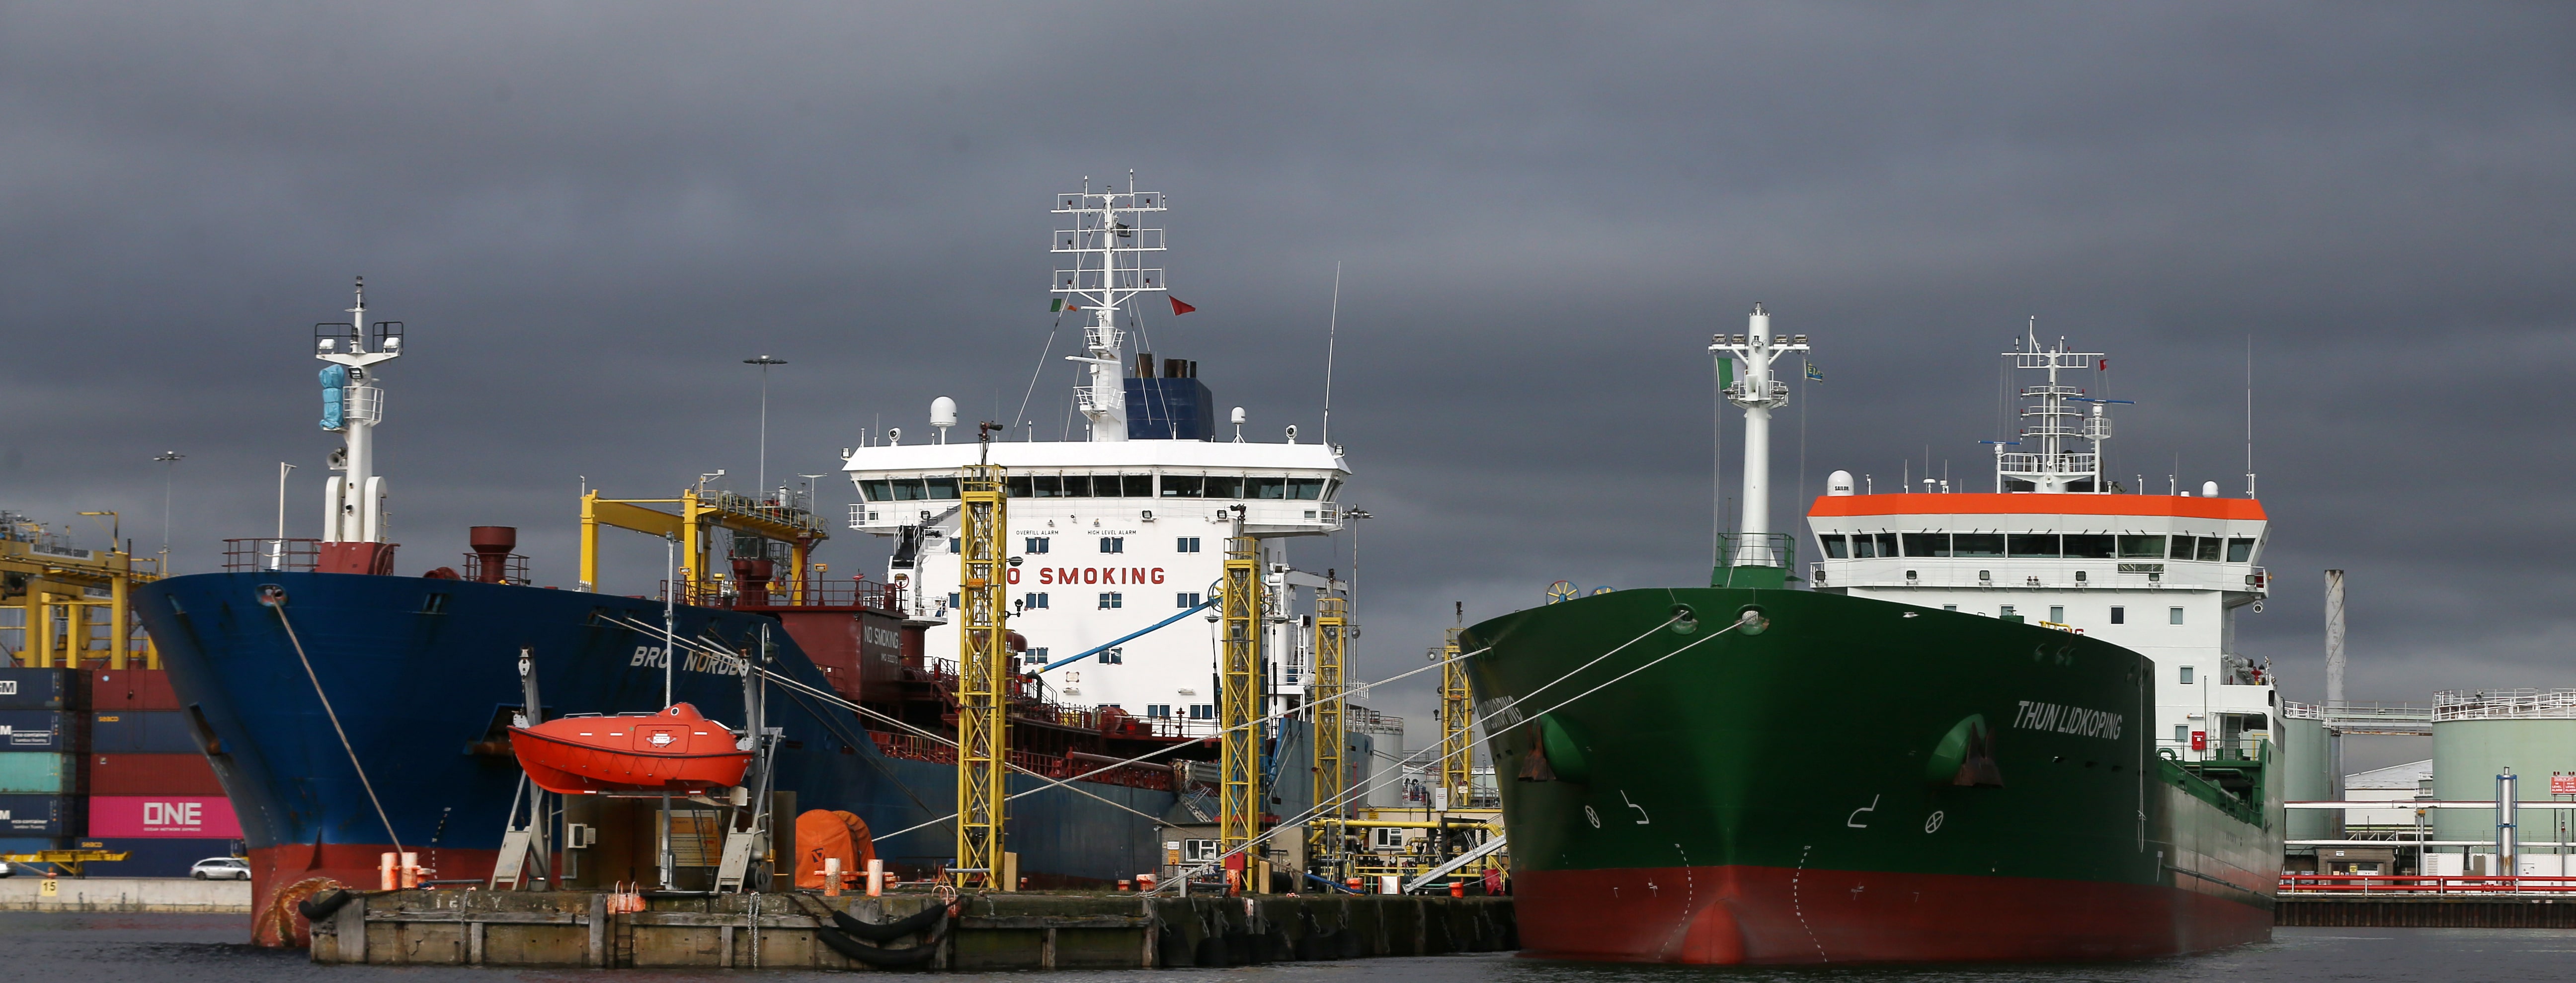 The shipping news: maritime activity down 6% in q1 as stockpiling recedes